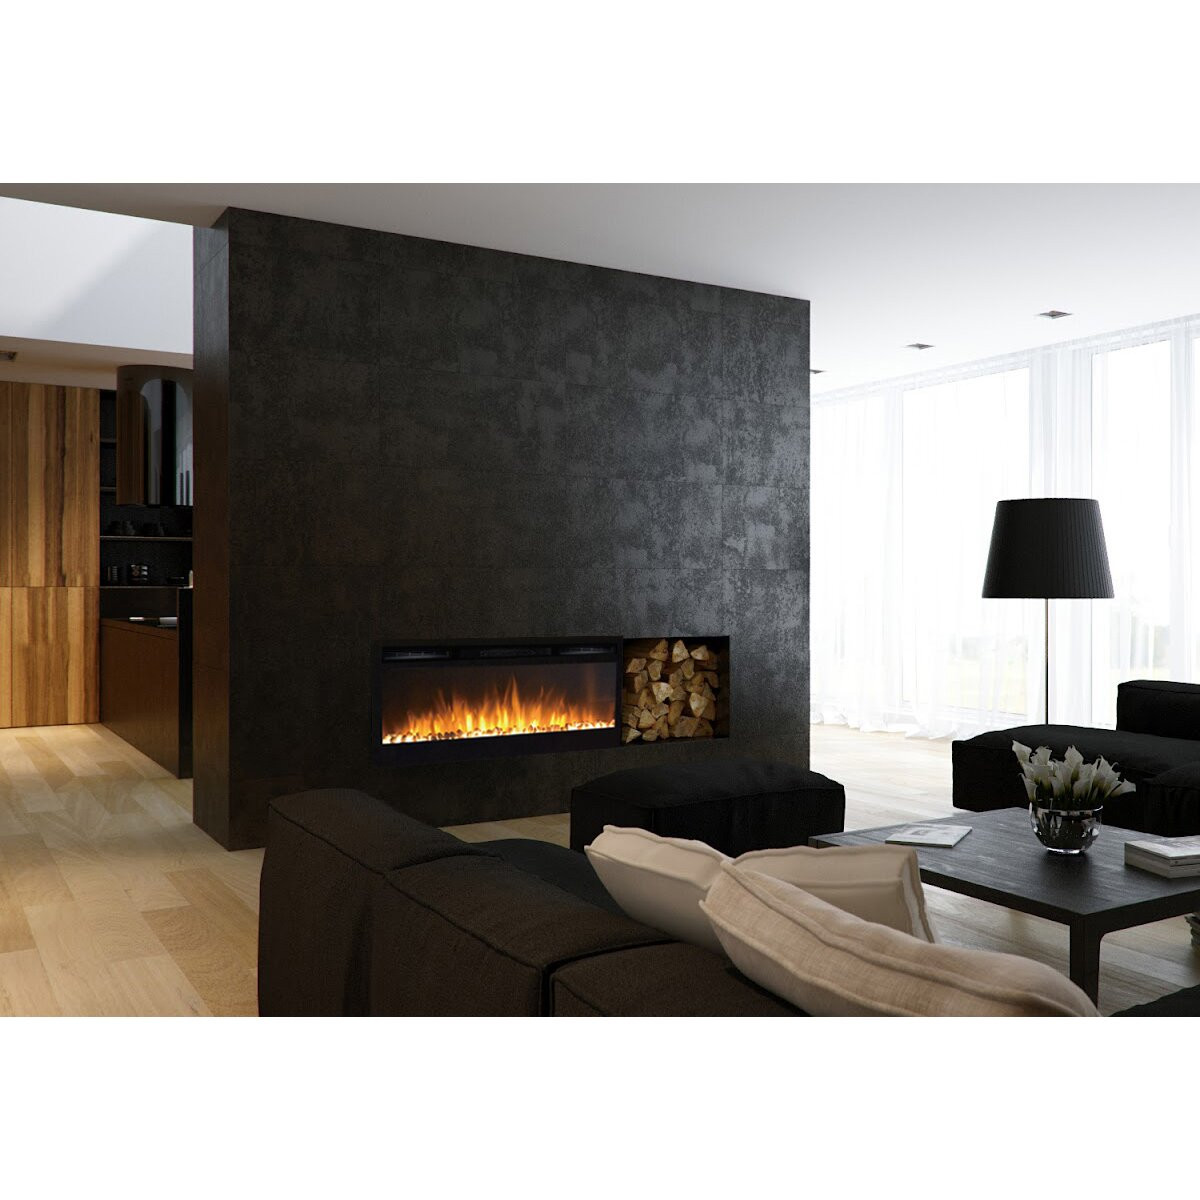 In Wall Electric Fireplace
 Moda Flame Cynergy Pebble Stone Built In Wall Mount